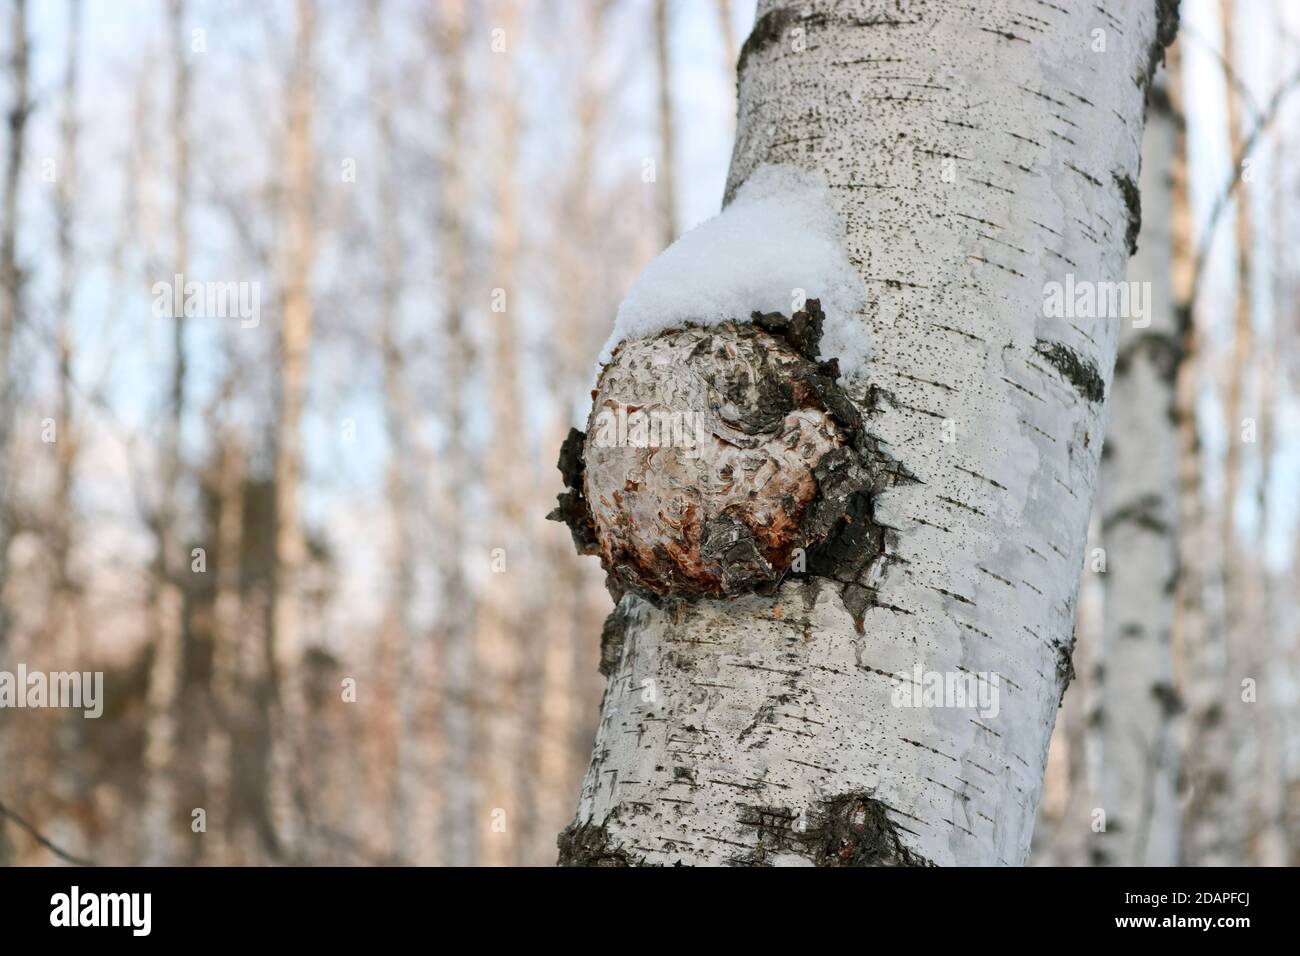 Chaga (Inonotus obliquus) is a fungus from the Hymenochaetaceae family. Potential medicine for coronavirus and cancer. It parasitizes birch trees. Stock Photo